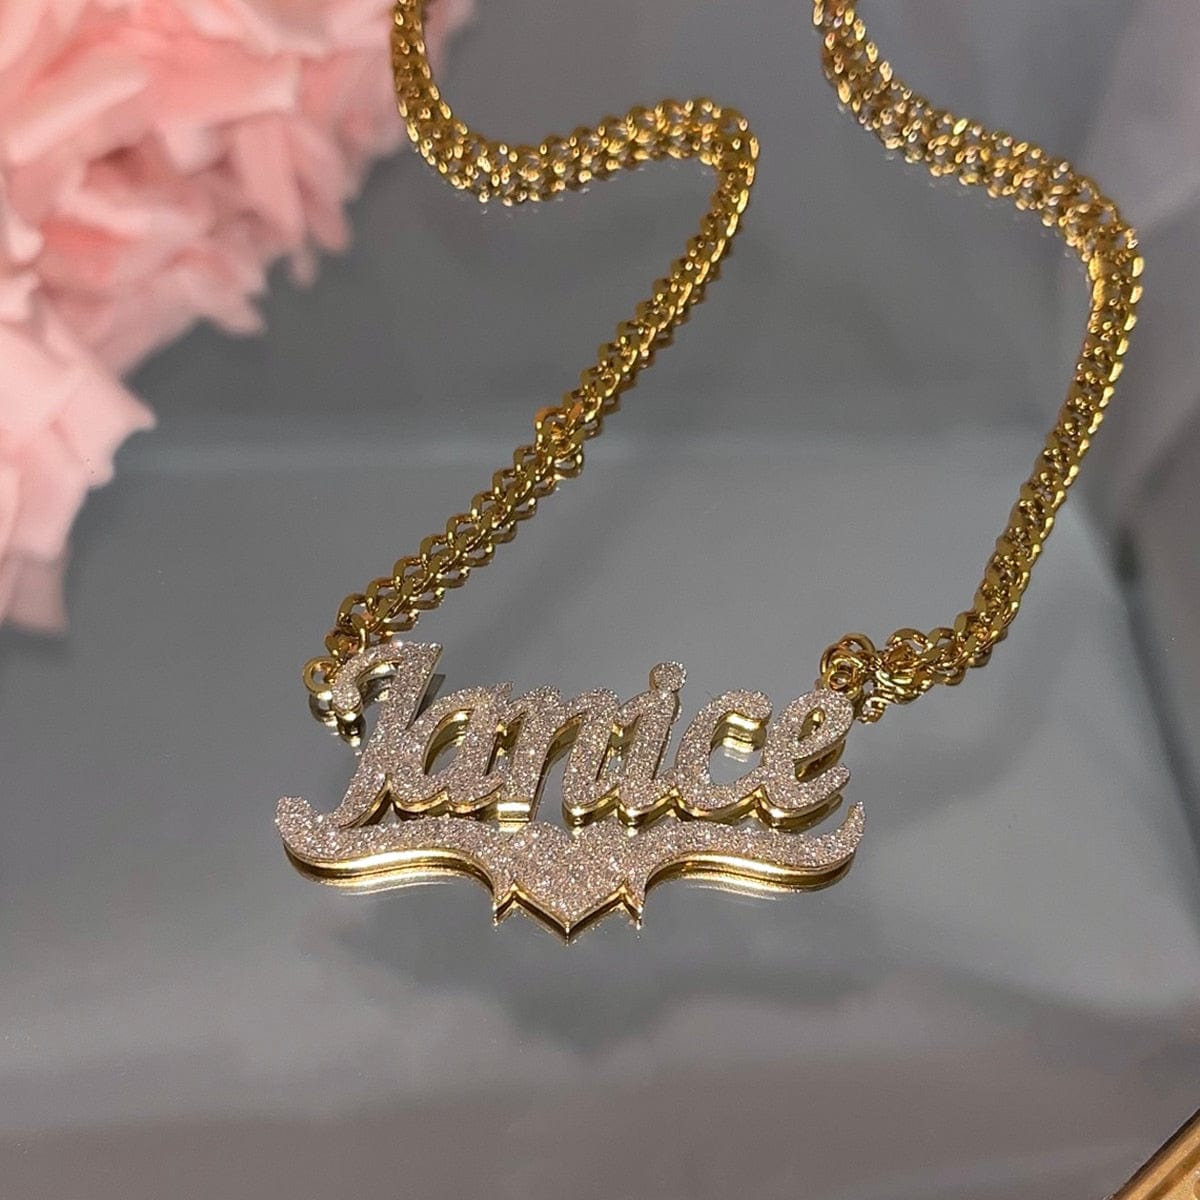 name plate necklace near me